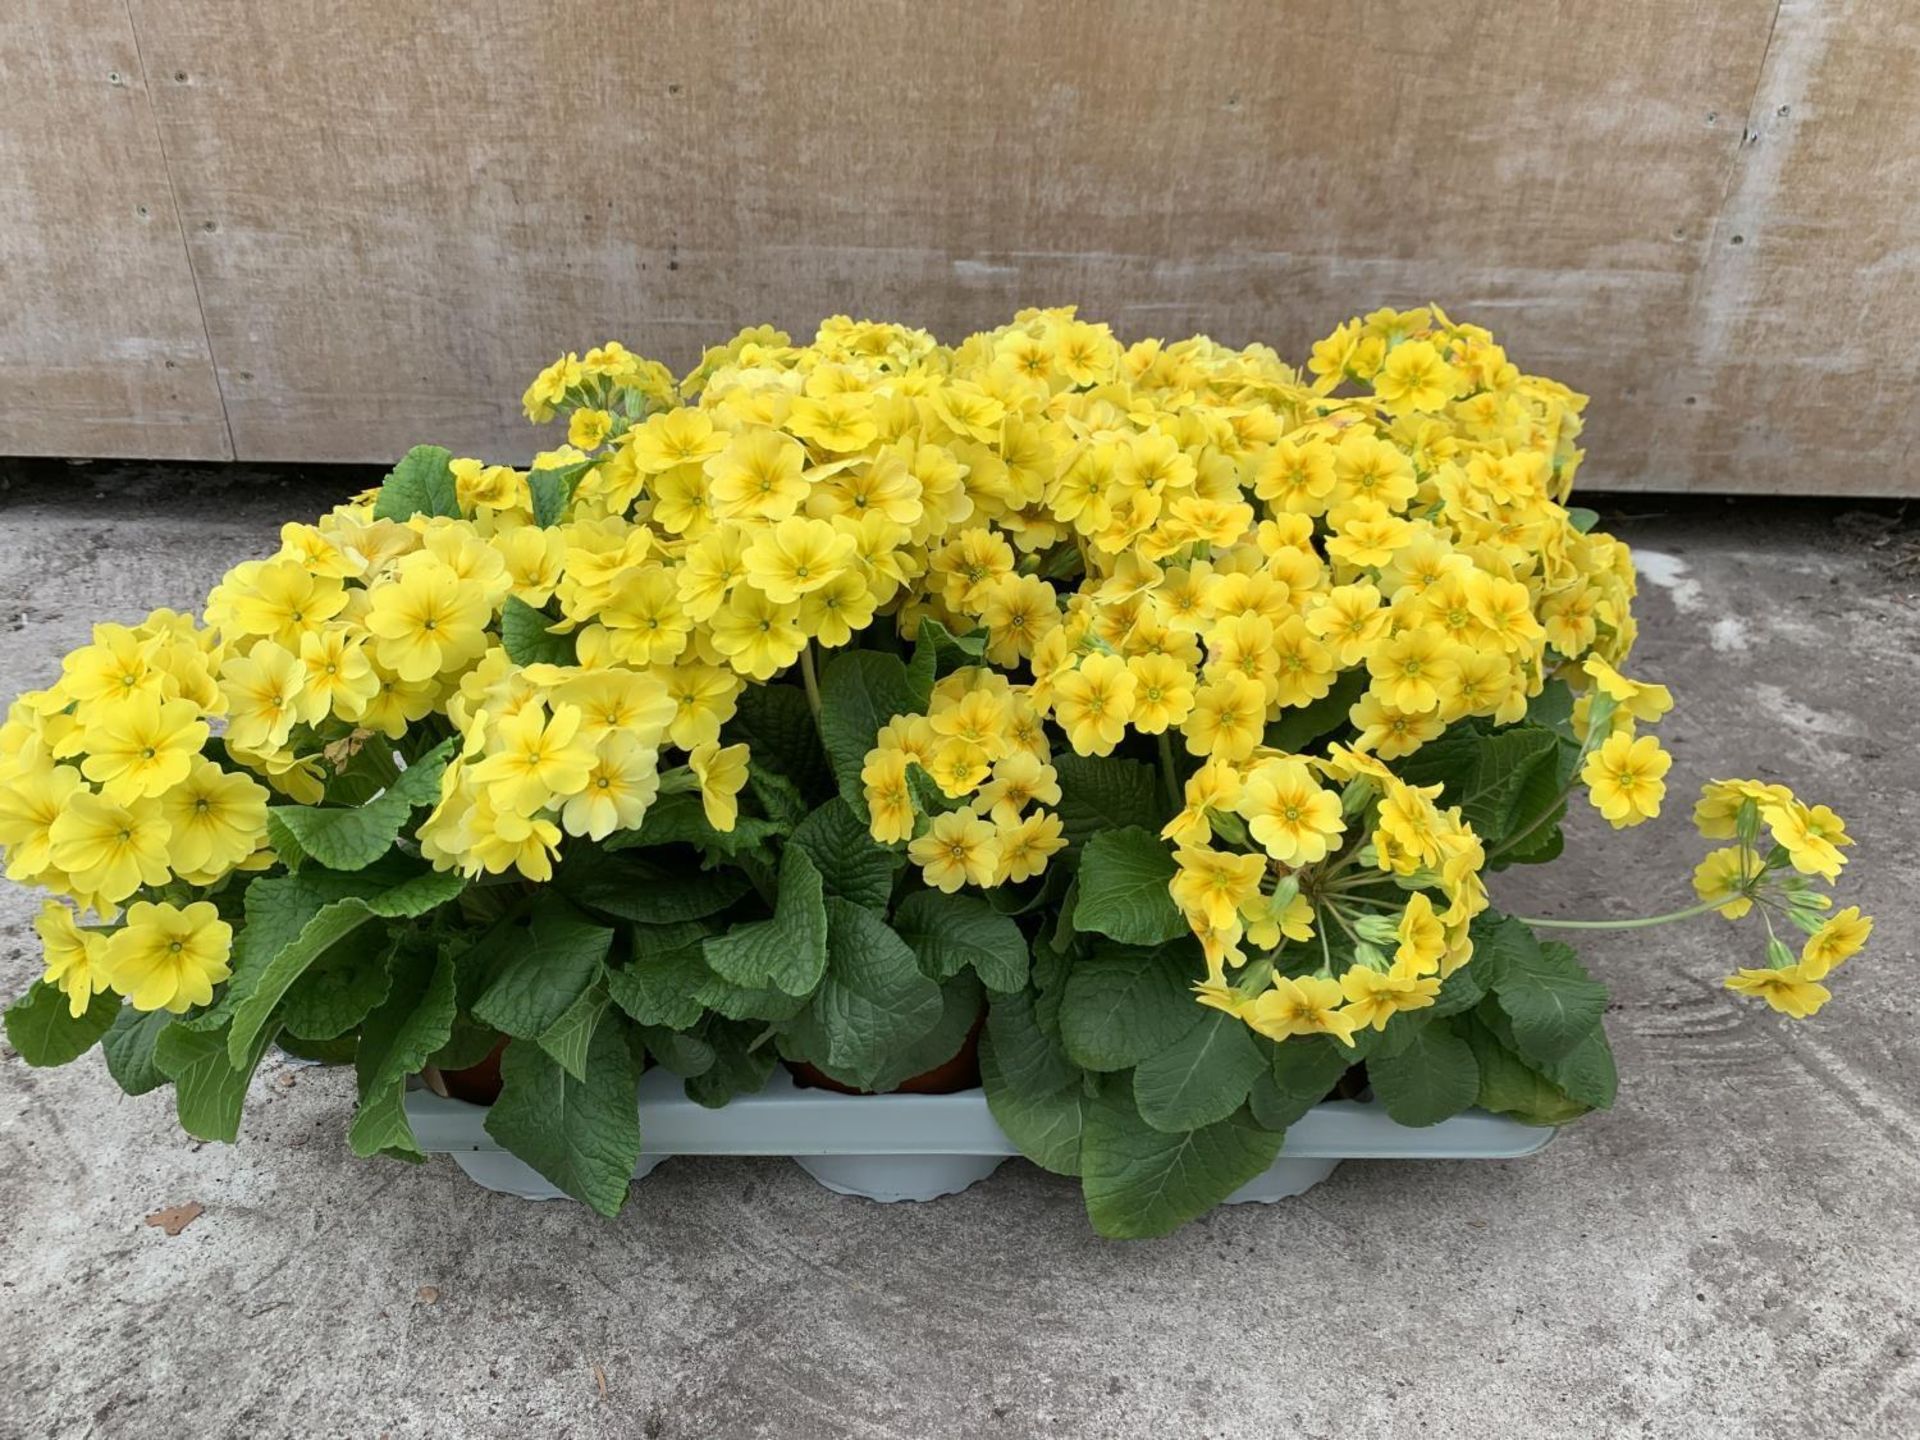 SIX GOLDEN NUGGET SCENTED YELLOW POLYANTHUS PLUS VAT TO BE SOLD FOR THE SIX - Image 4 of 4